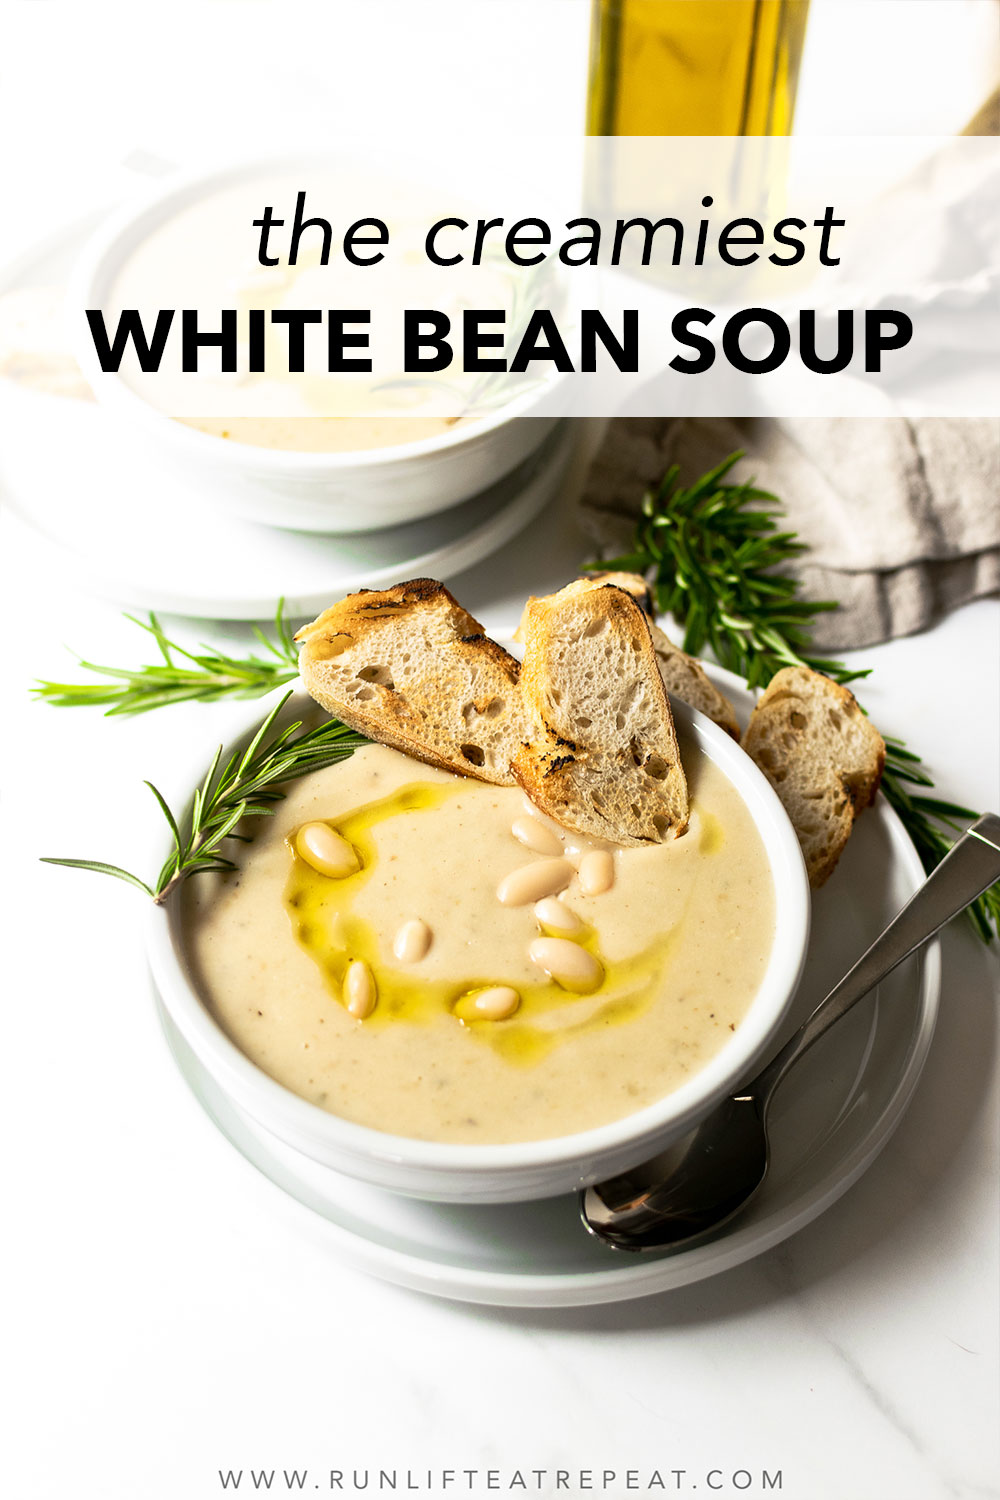 Creamy White Bean Soup is a delicious dish made with potatoes, beans, onions, garlic, broth, spices, and milk. This comforting soup is the perfect weeknight dinner and is ready to eat in just 25 minutes. It's packed with flavor and has a creamy texture that everyone in your family will love.